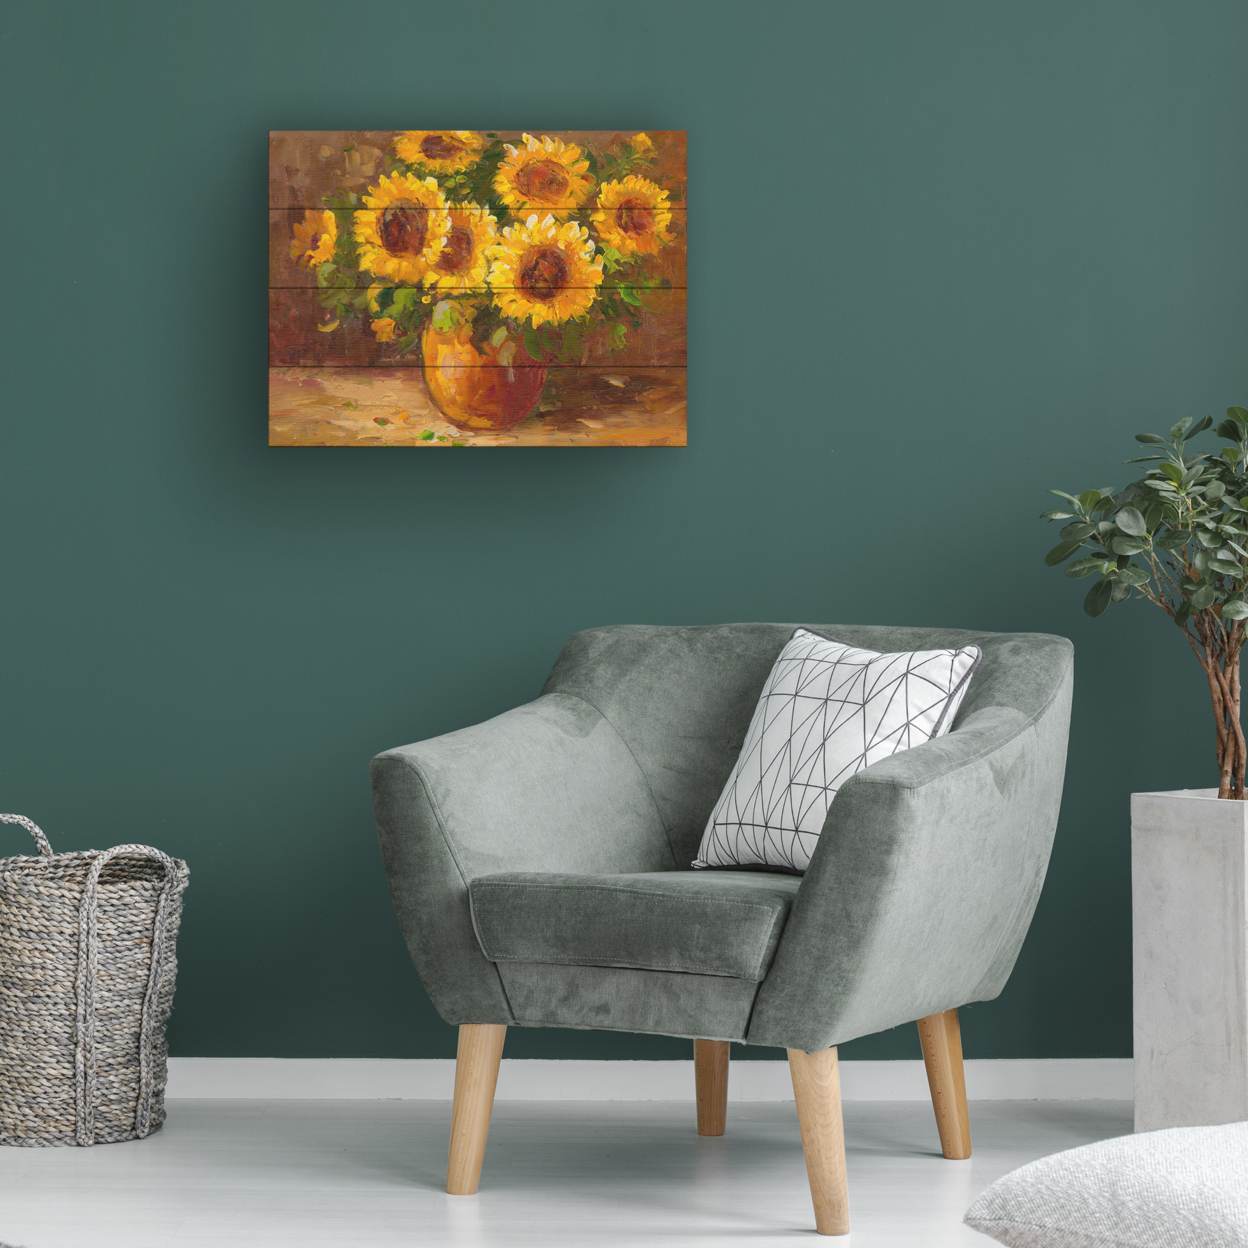 Wall Art 12 X 16 Inches Titled Sunflowers Still Life Ready To Hang Printed On Wooden Planks